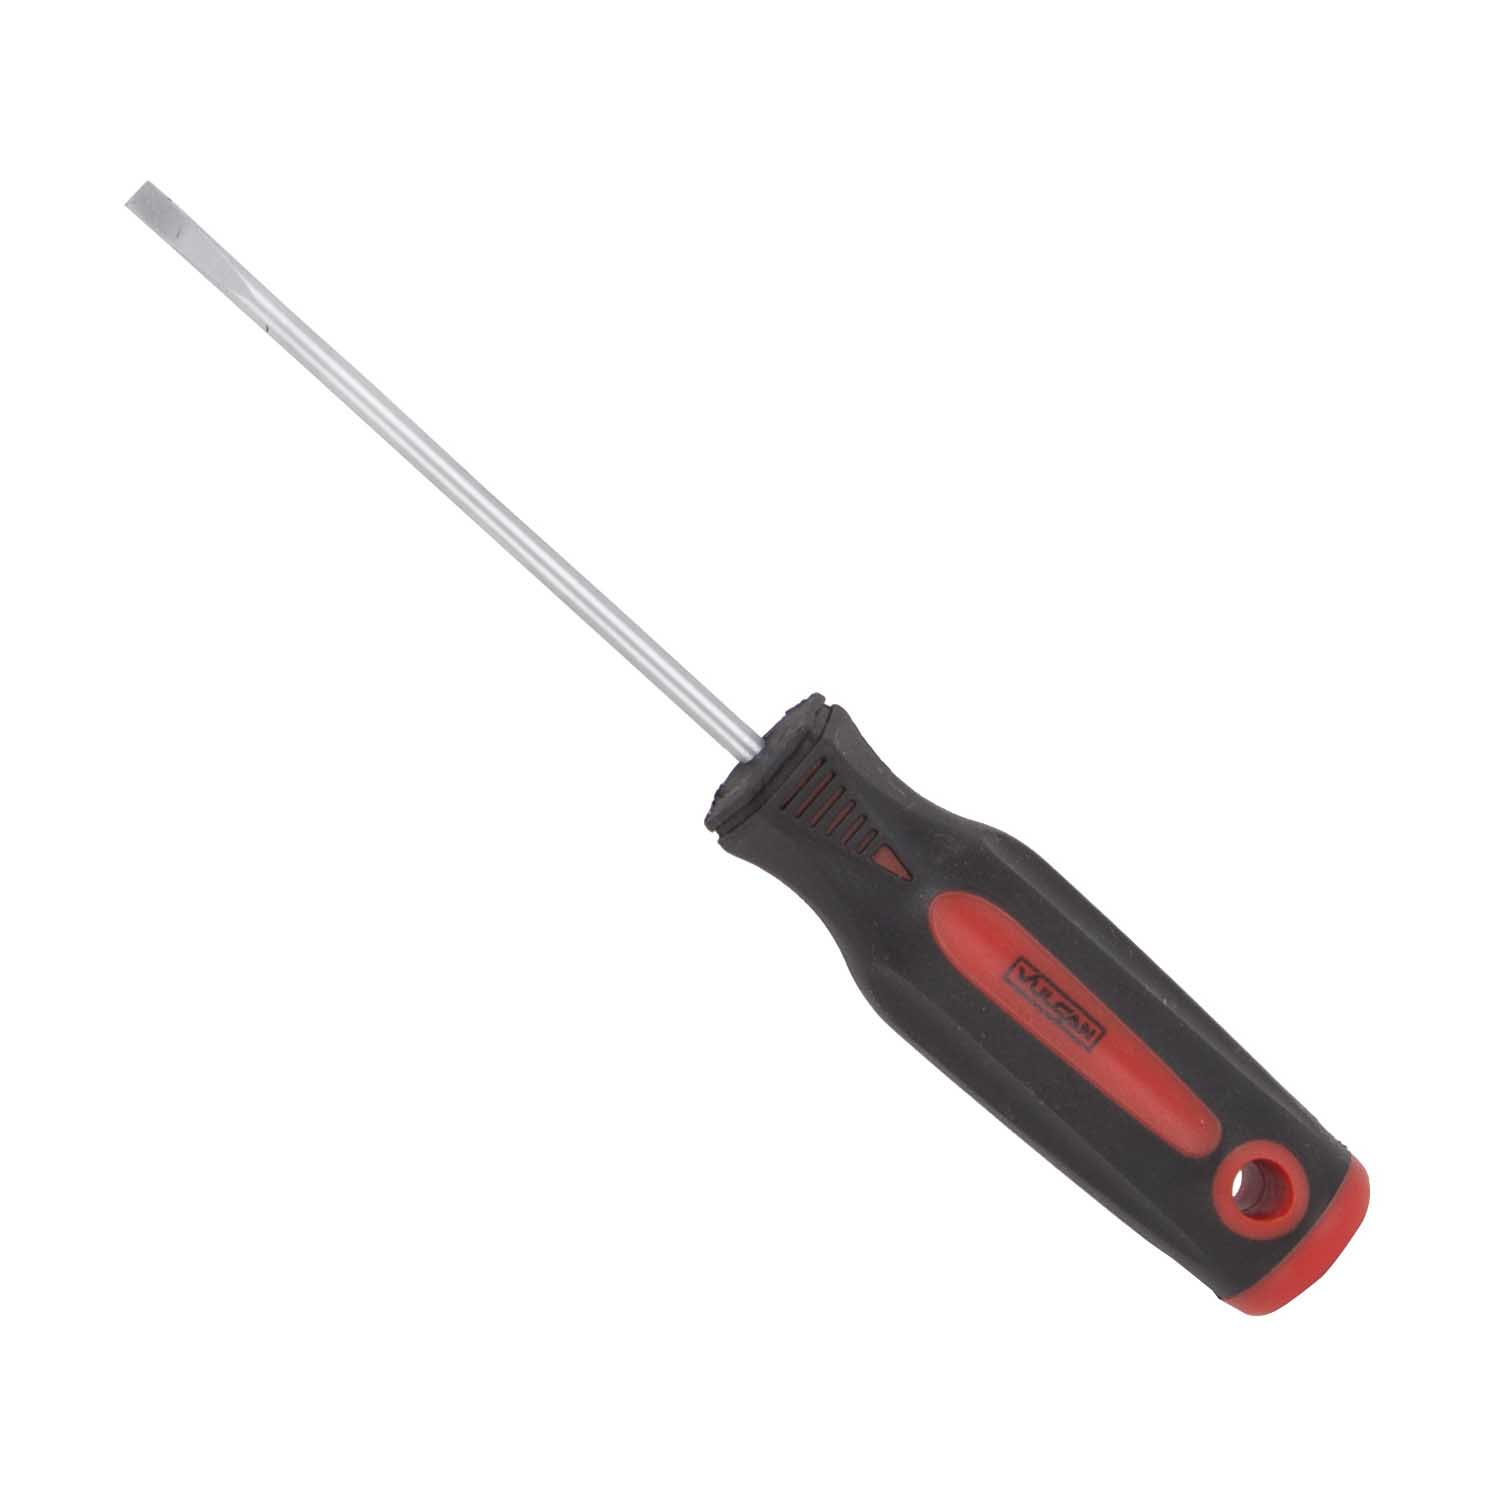 Screwdriver, 1/8 in Drive, Slotted Drive, 5-3/4 in OAL, 3 in L Shank